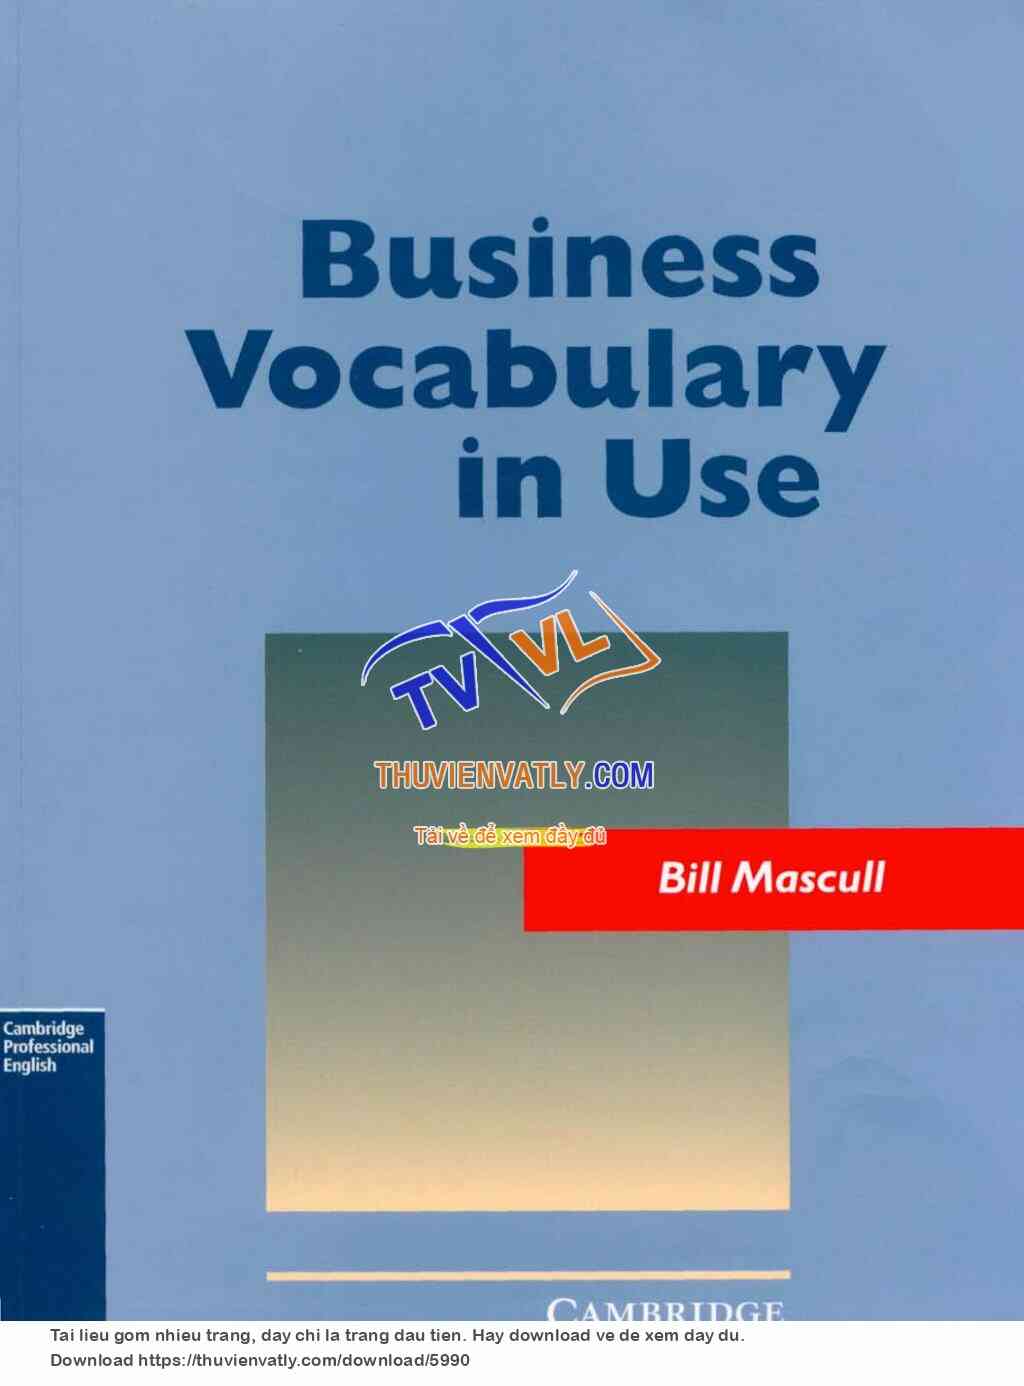 Cambridge - Business Vocabulary in Use